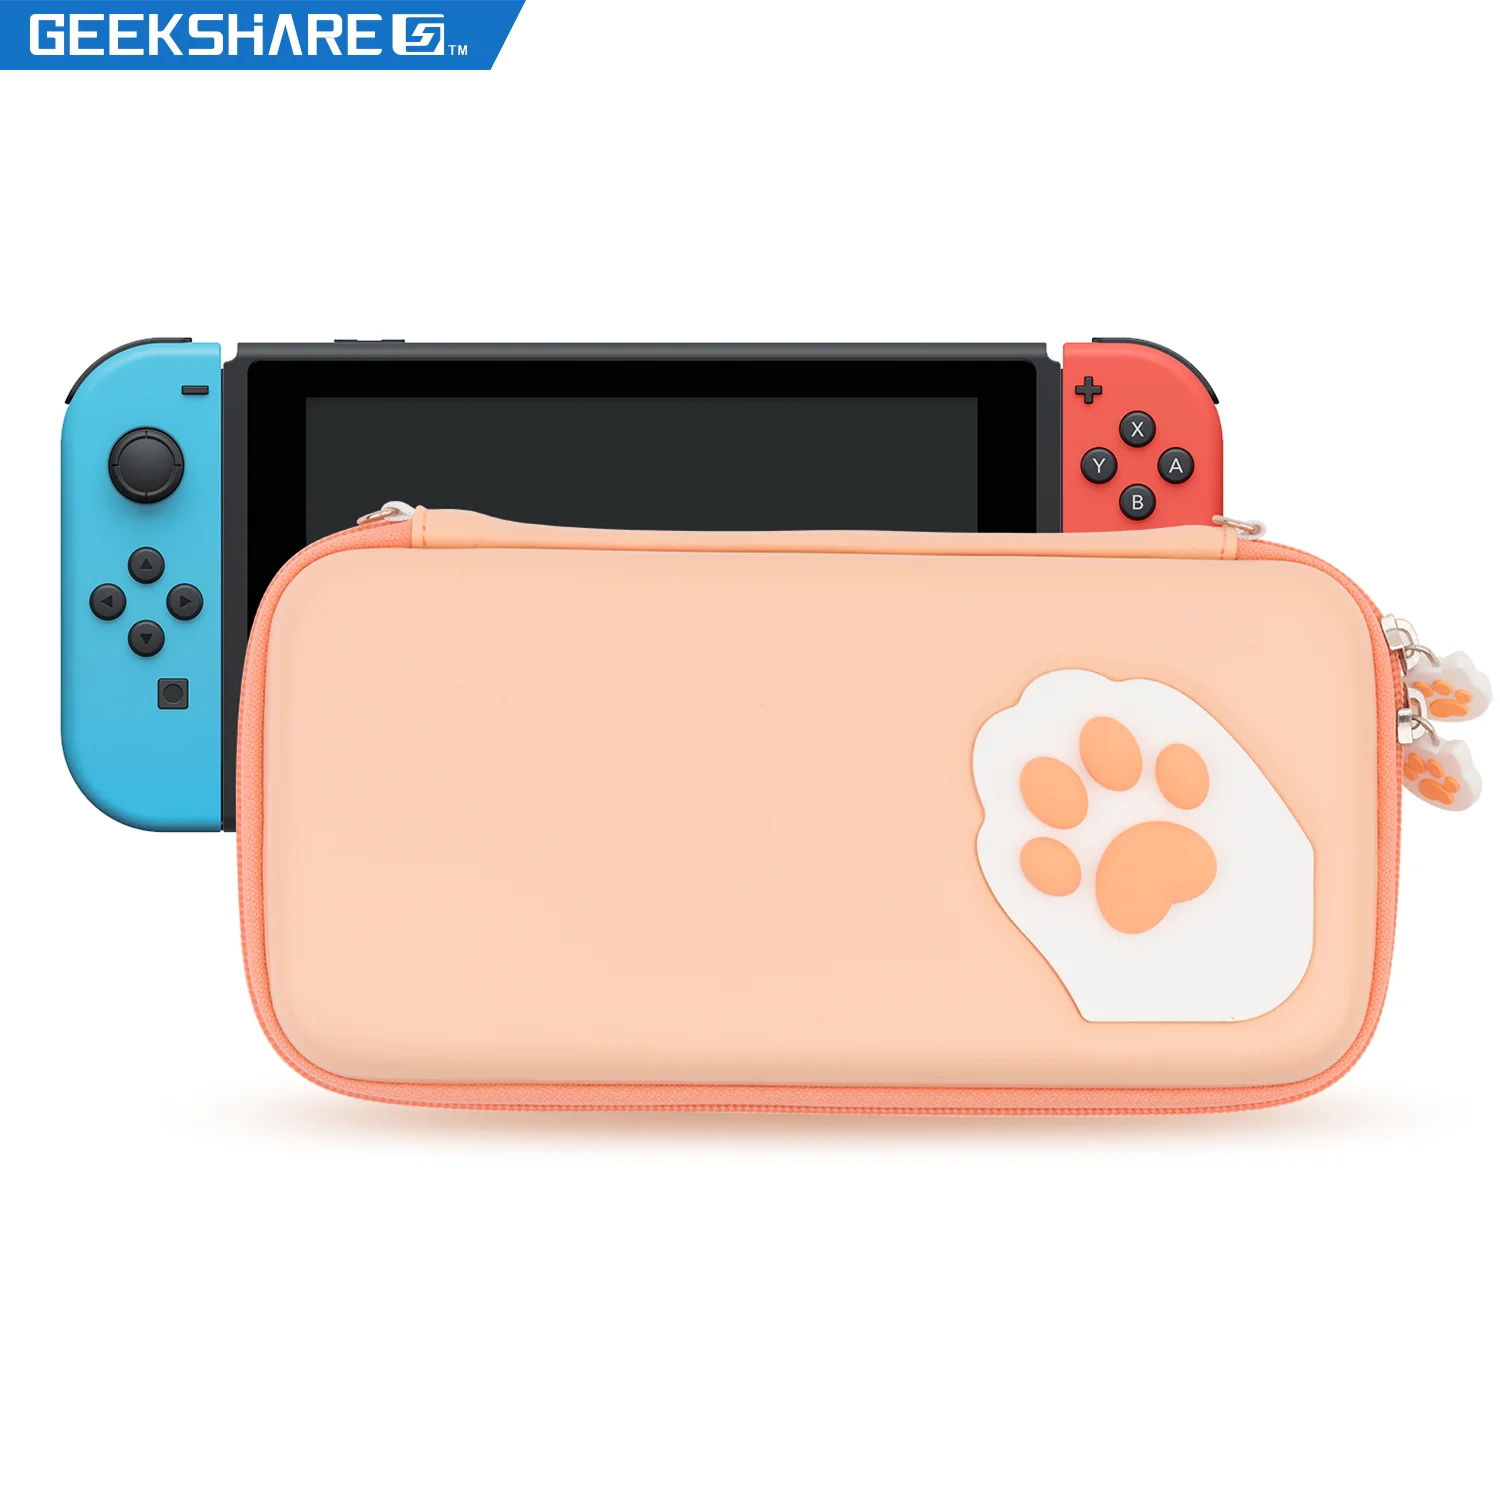 

GeekShare Official Case For Nintendo Switch Kawaii Portable Hard Shell Travel Carrying Cases Fit Switch OLED Console and Joy-con